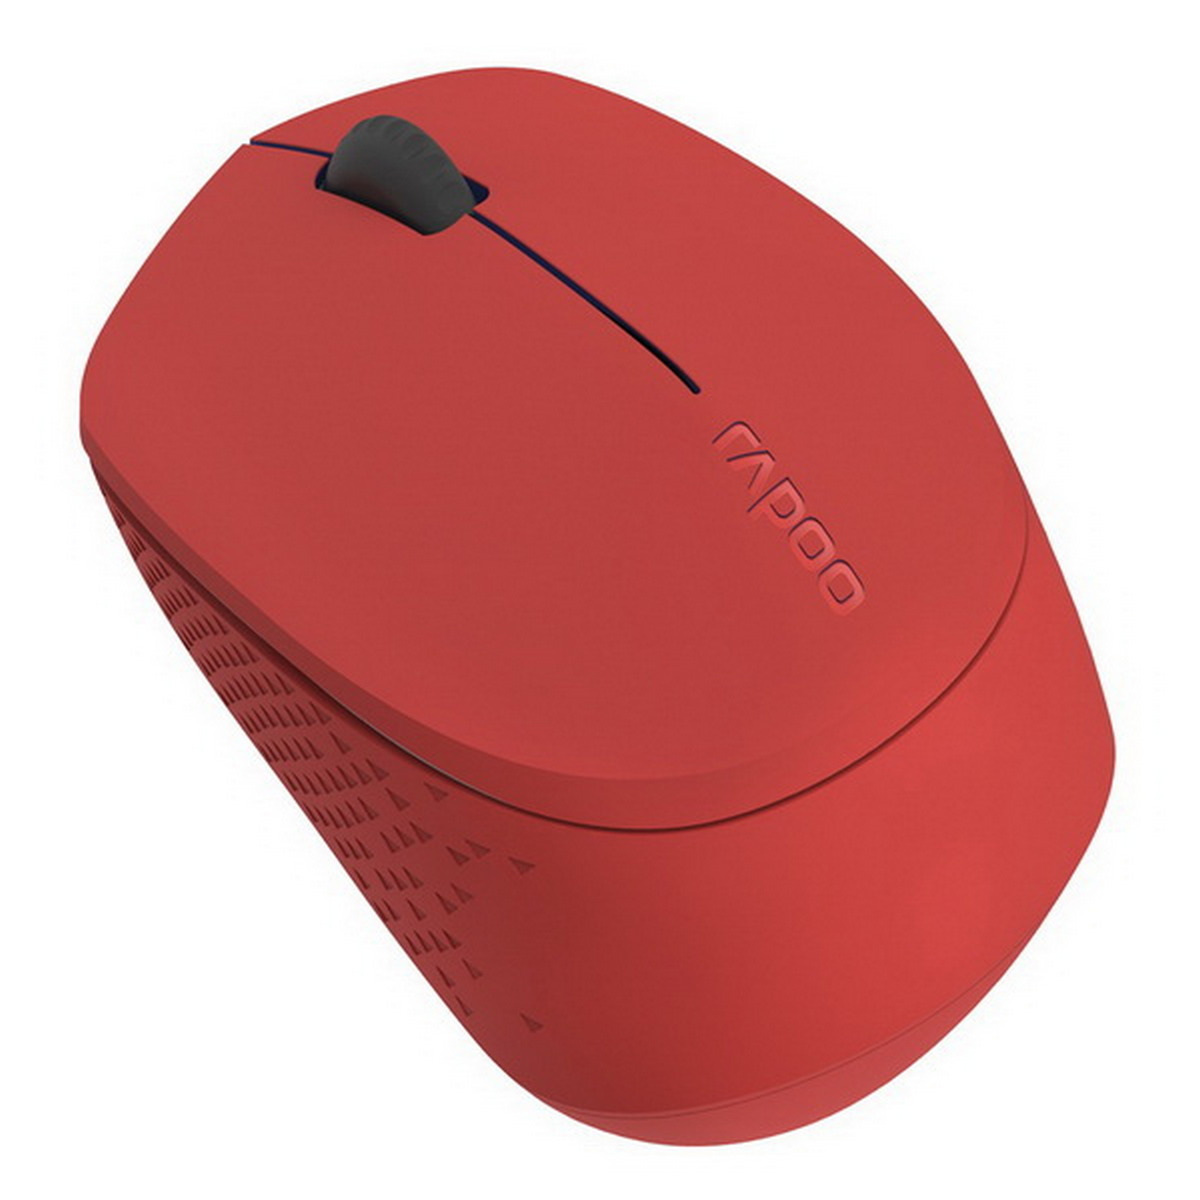  Rapoo Wireless Mouse (Red) MSM-100